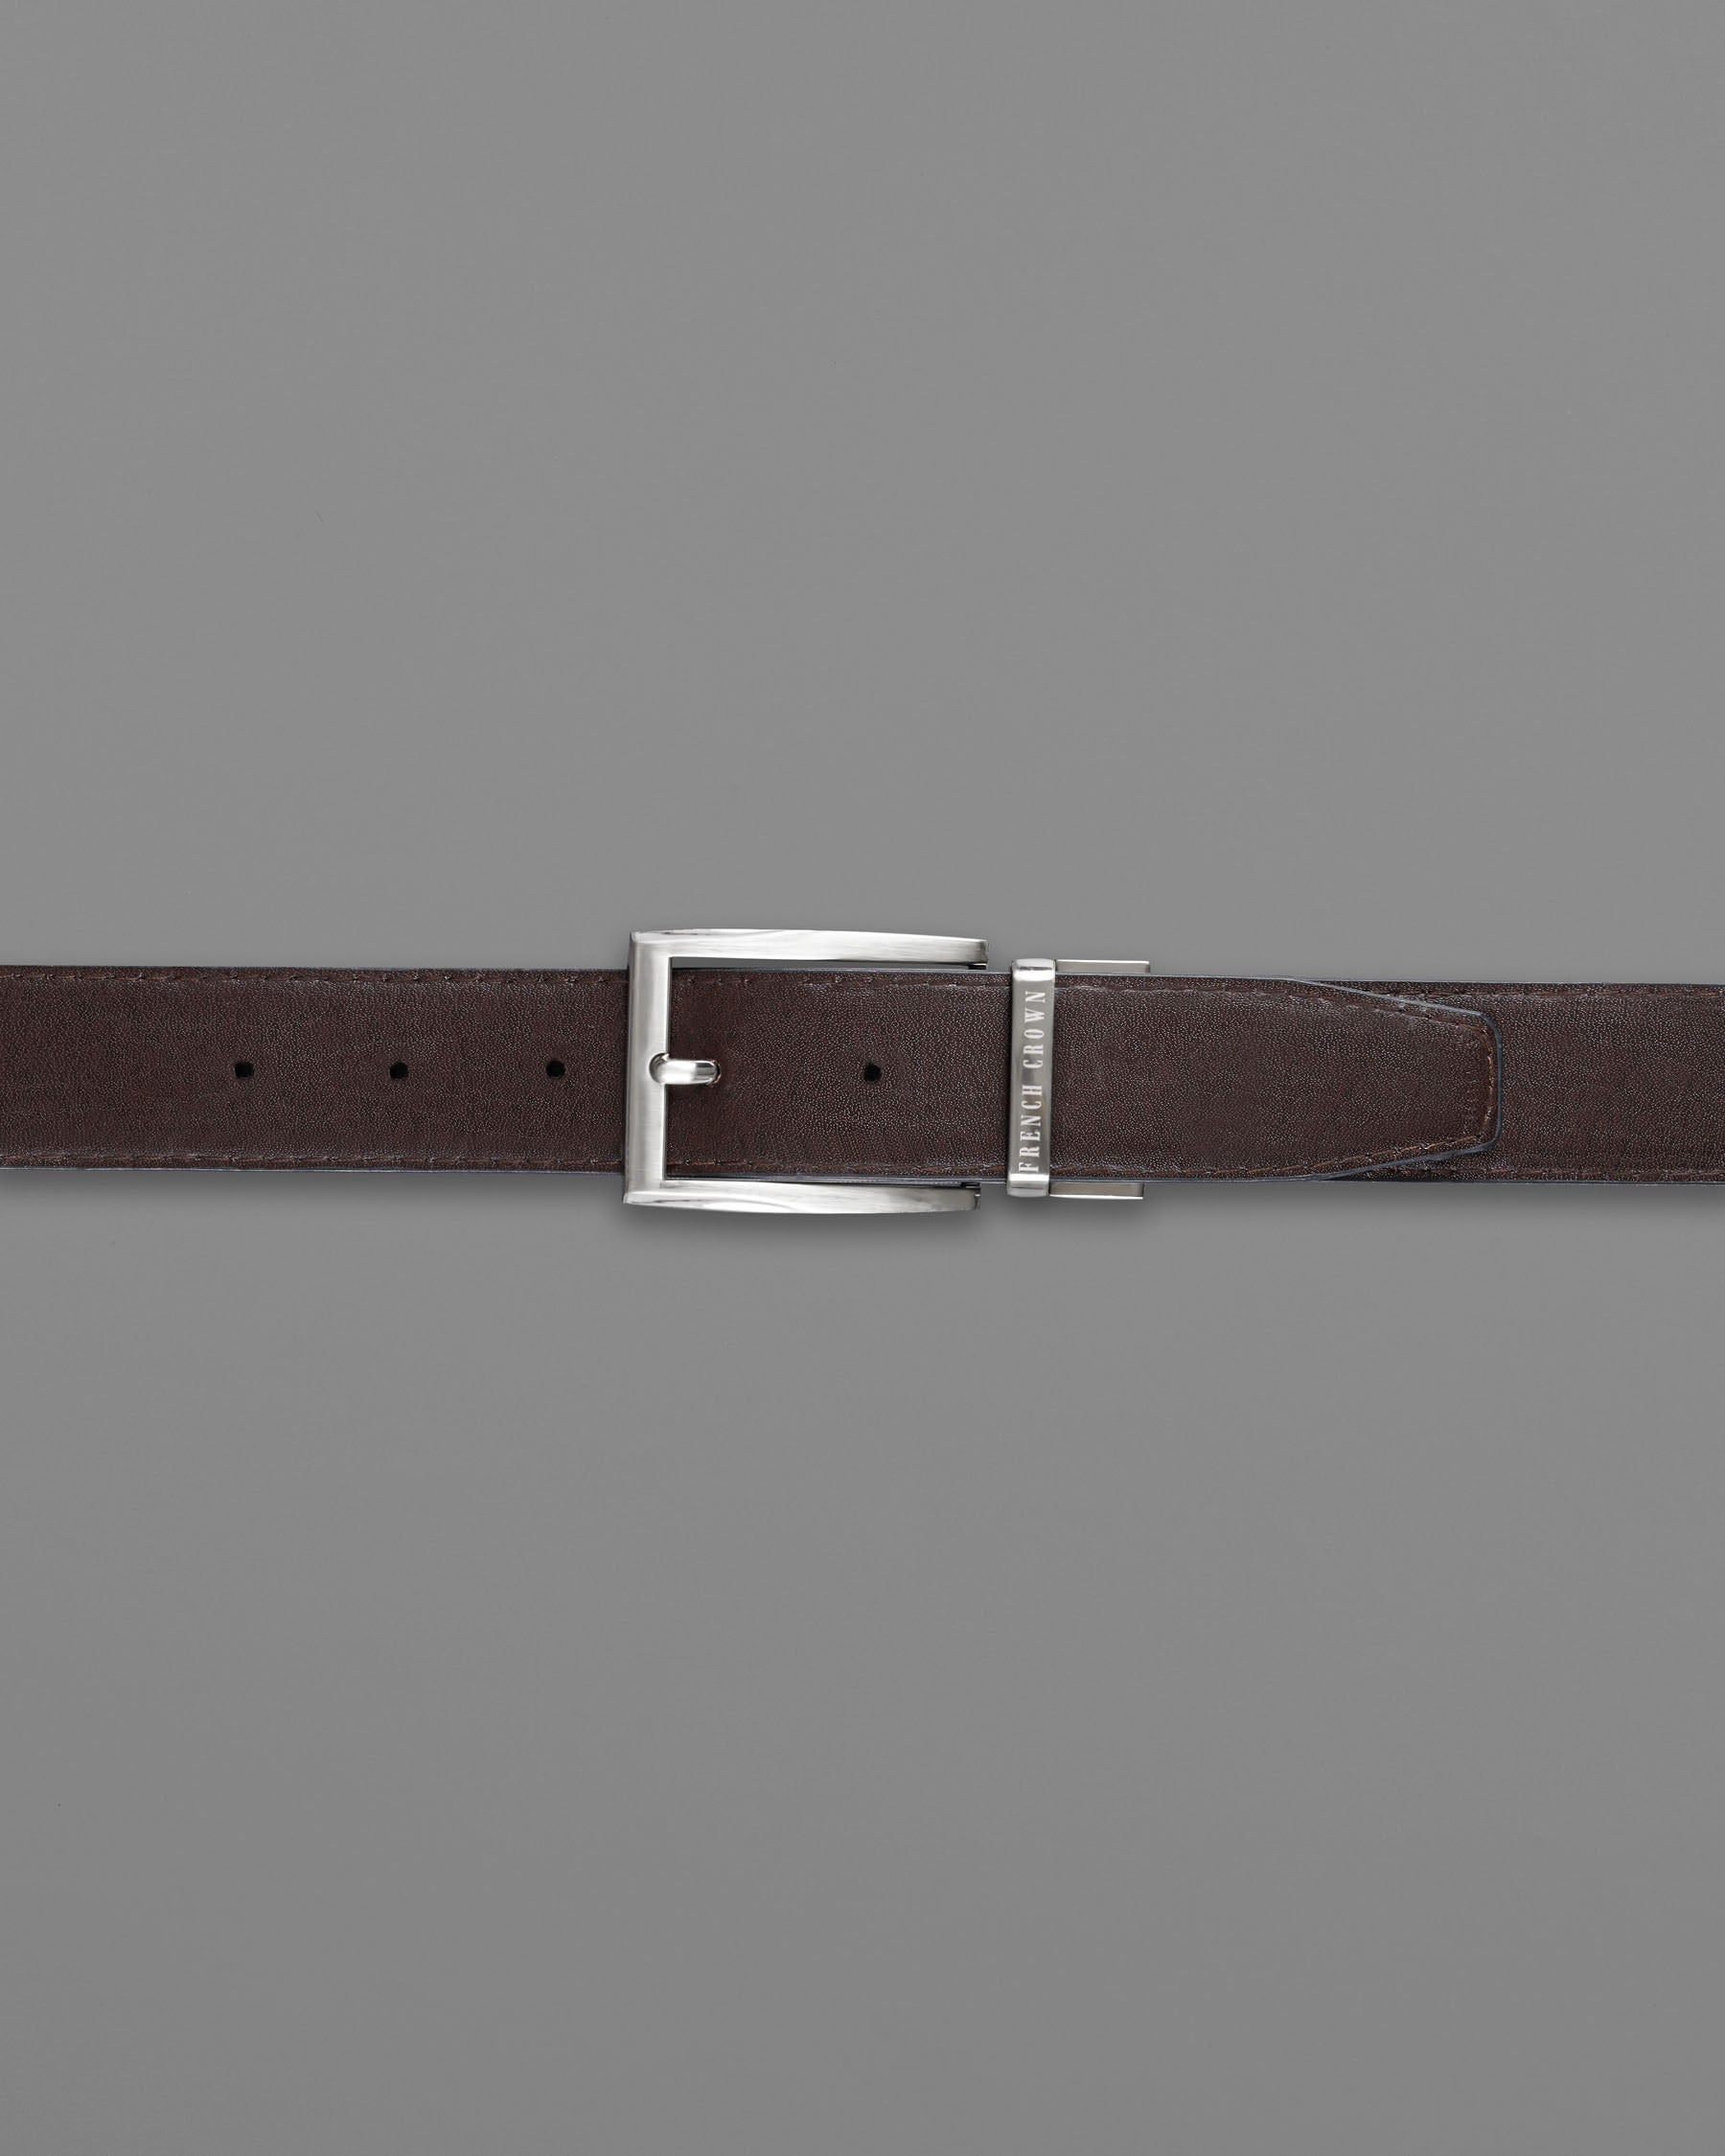 Silver Metallic Shiny Buckle with Jade Black and Brown Leather Free Handcrafted Reversible Belt BT072-28, BT072-30, BT072-32, BT072-34, BT072-36, BT072-38